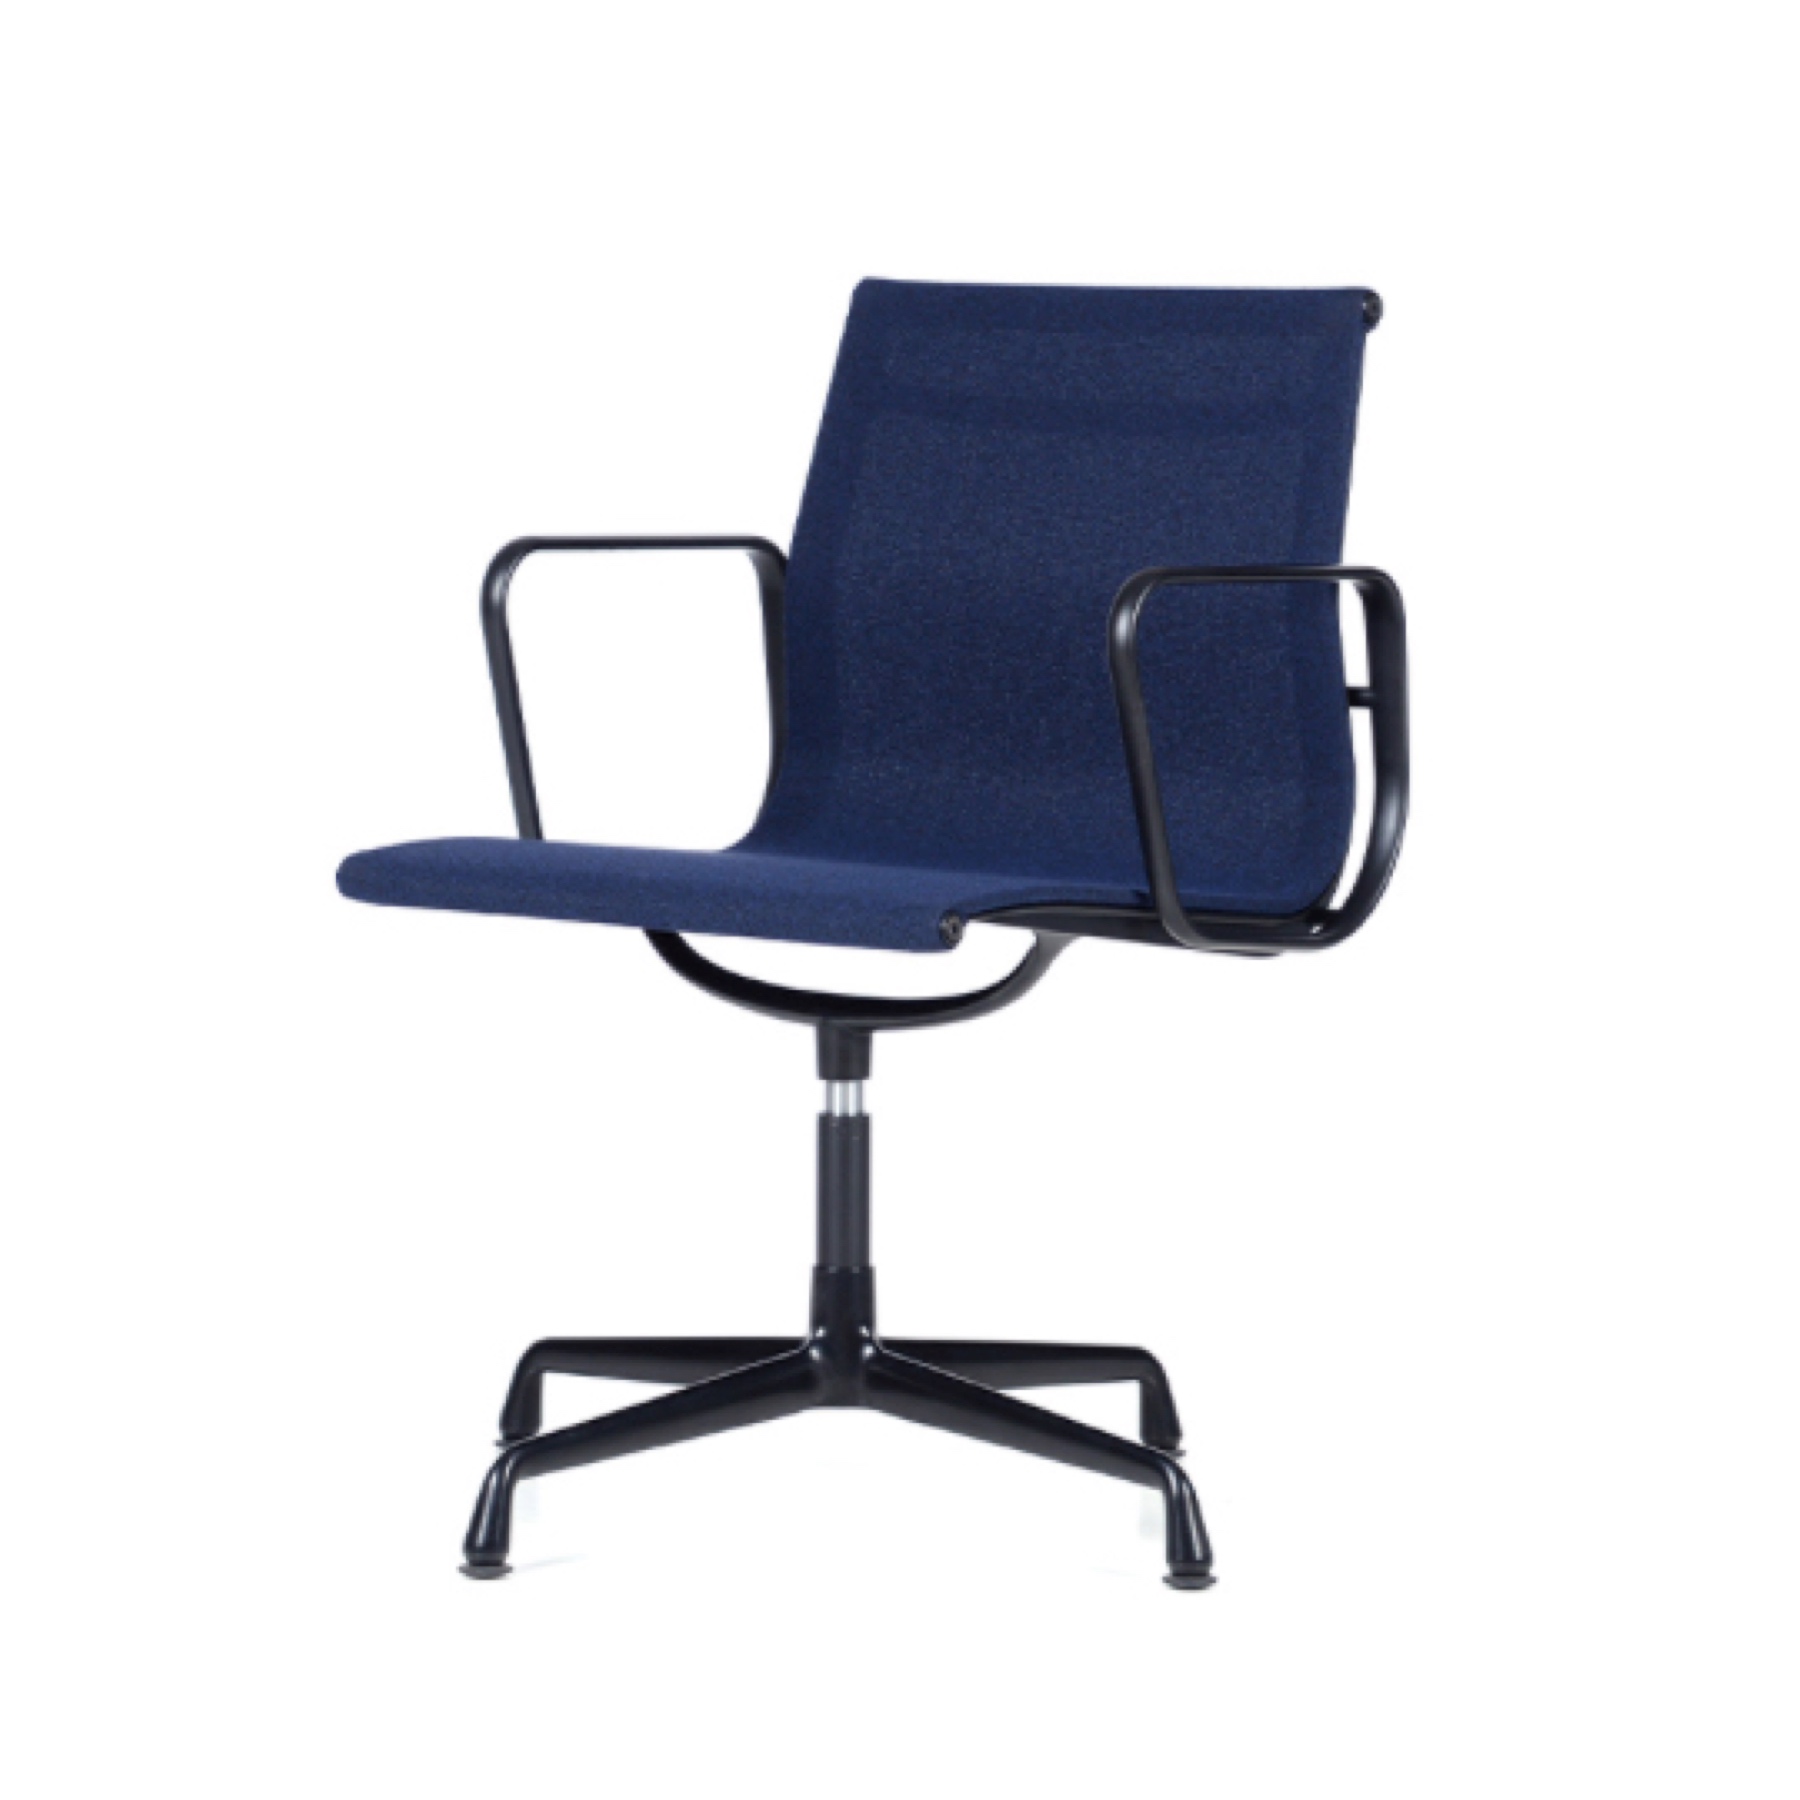 C-TR75009 Charles EA117 Aluminium Group Guest Low Back Office Chair